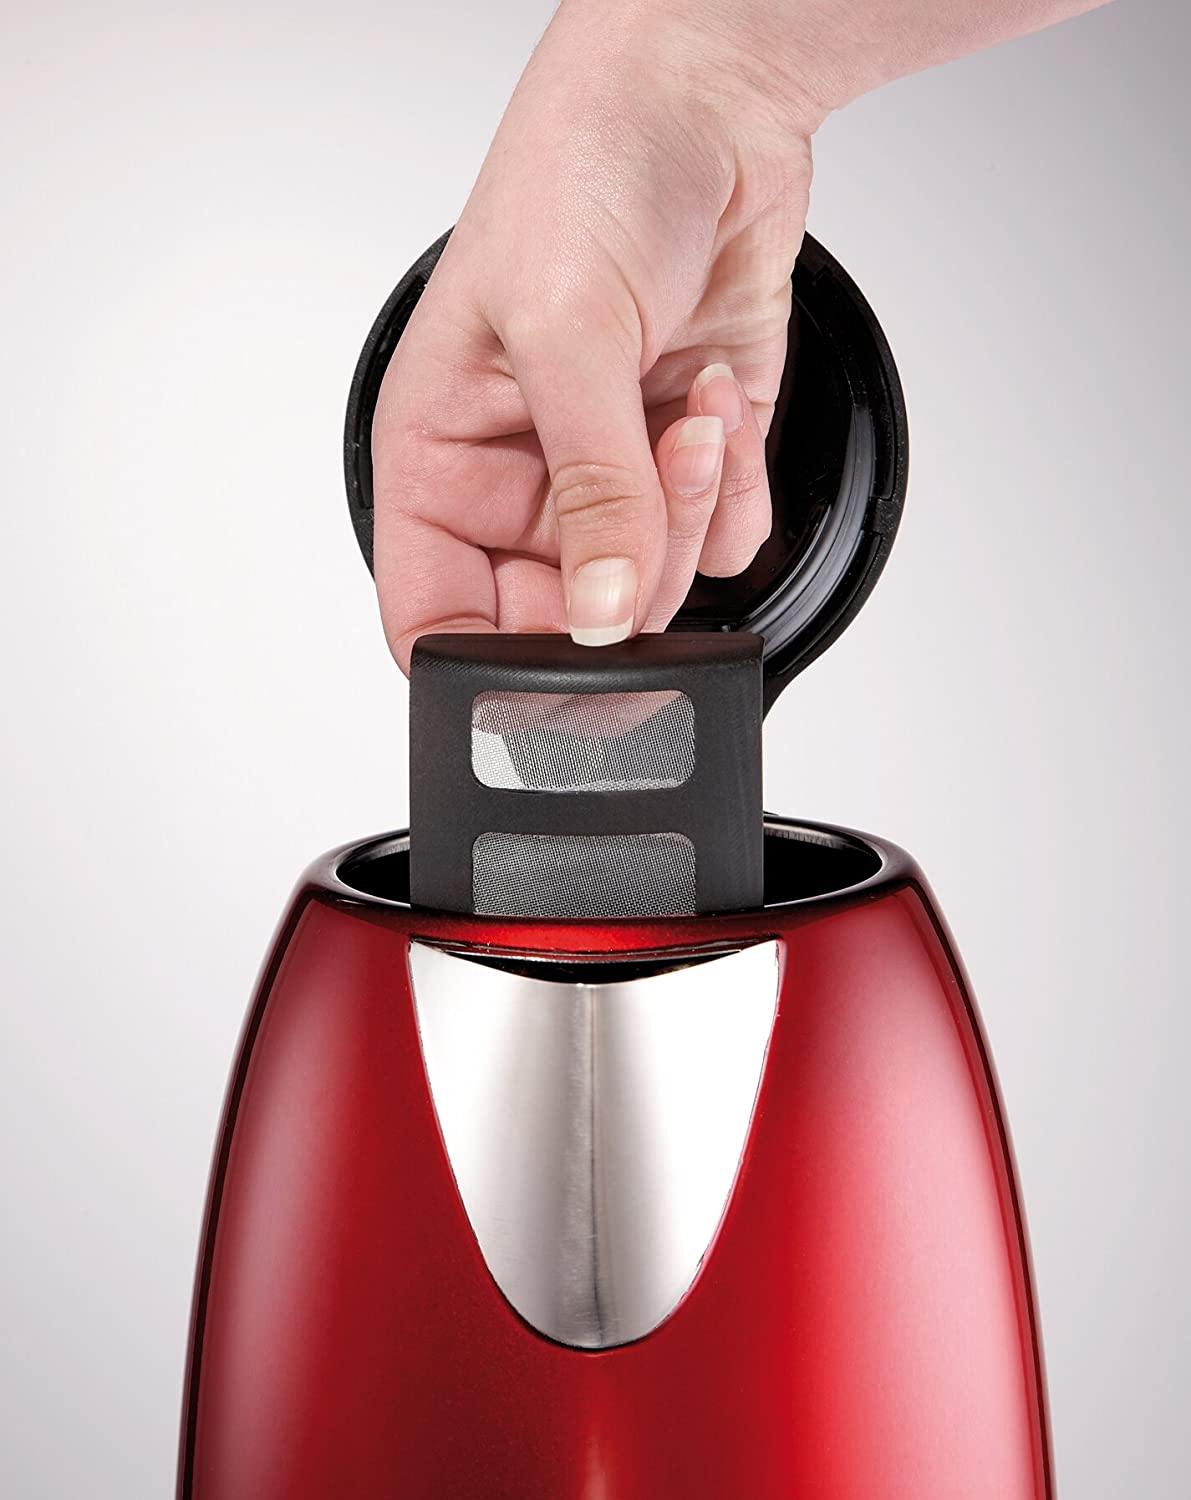 Moulinex Subito Kettle, 1.7l, 2400w (Red Metallic/Black) - Whole and All